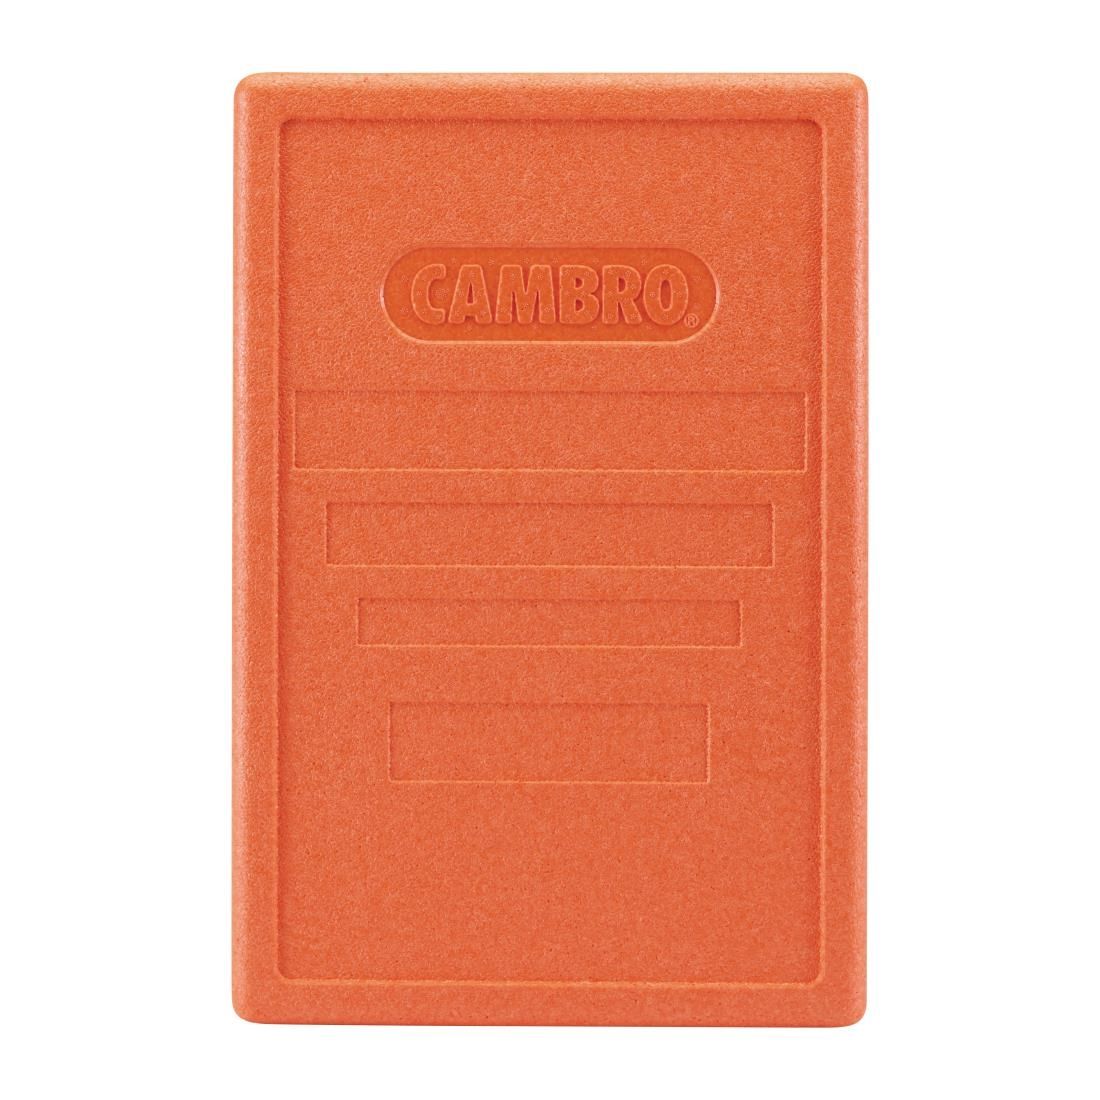 FB126 Cambro Lid for Insulated Food Pan Carrier Orange JD Catering Equipment Solutions Ltd